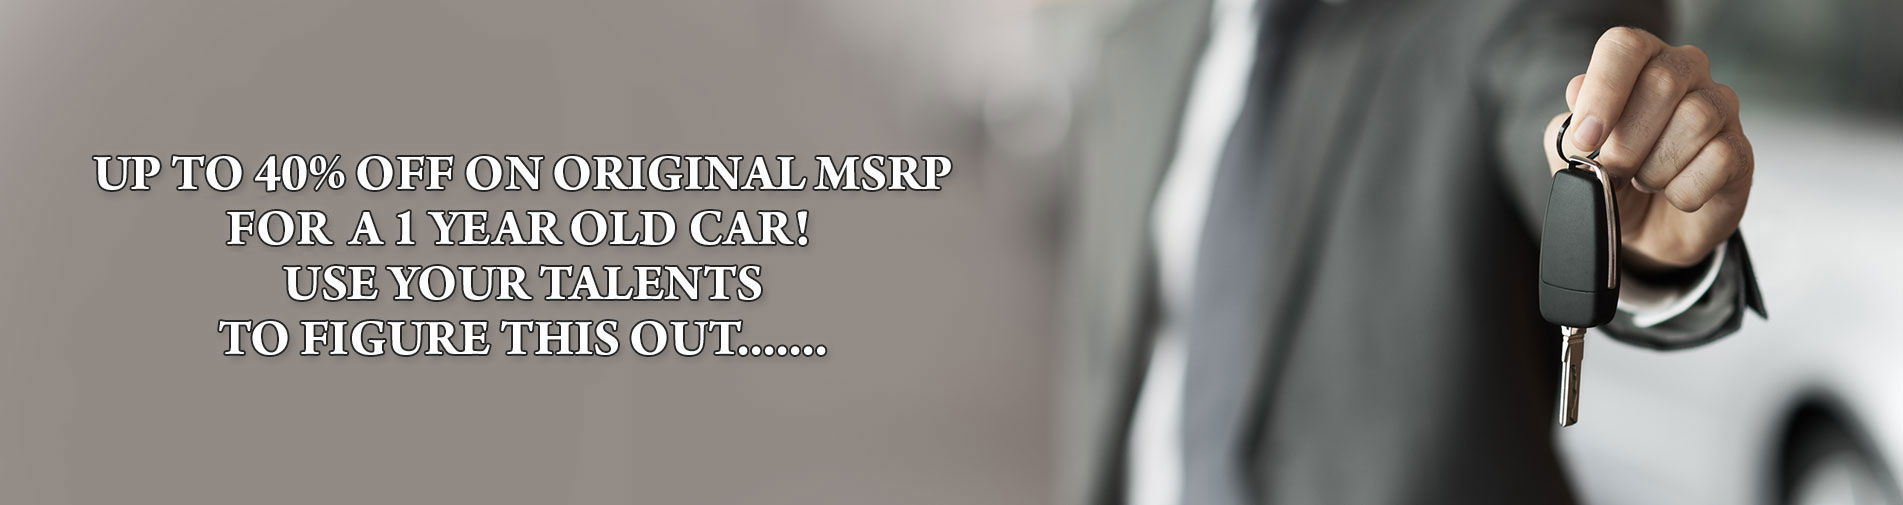  up to 40% on original MARP for a 1 year old car